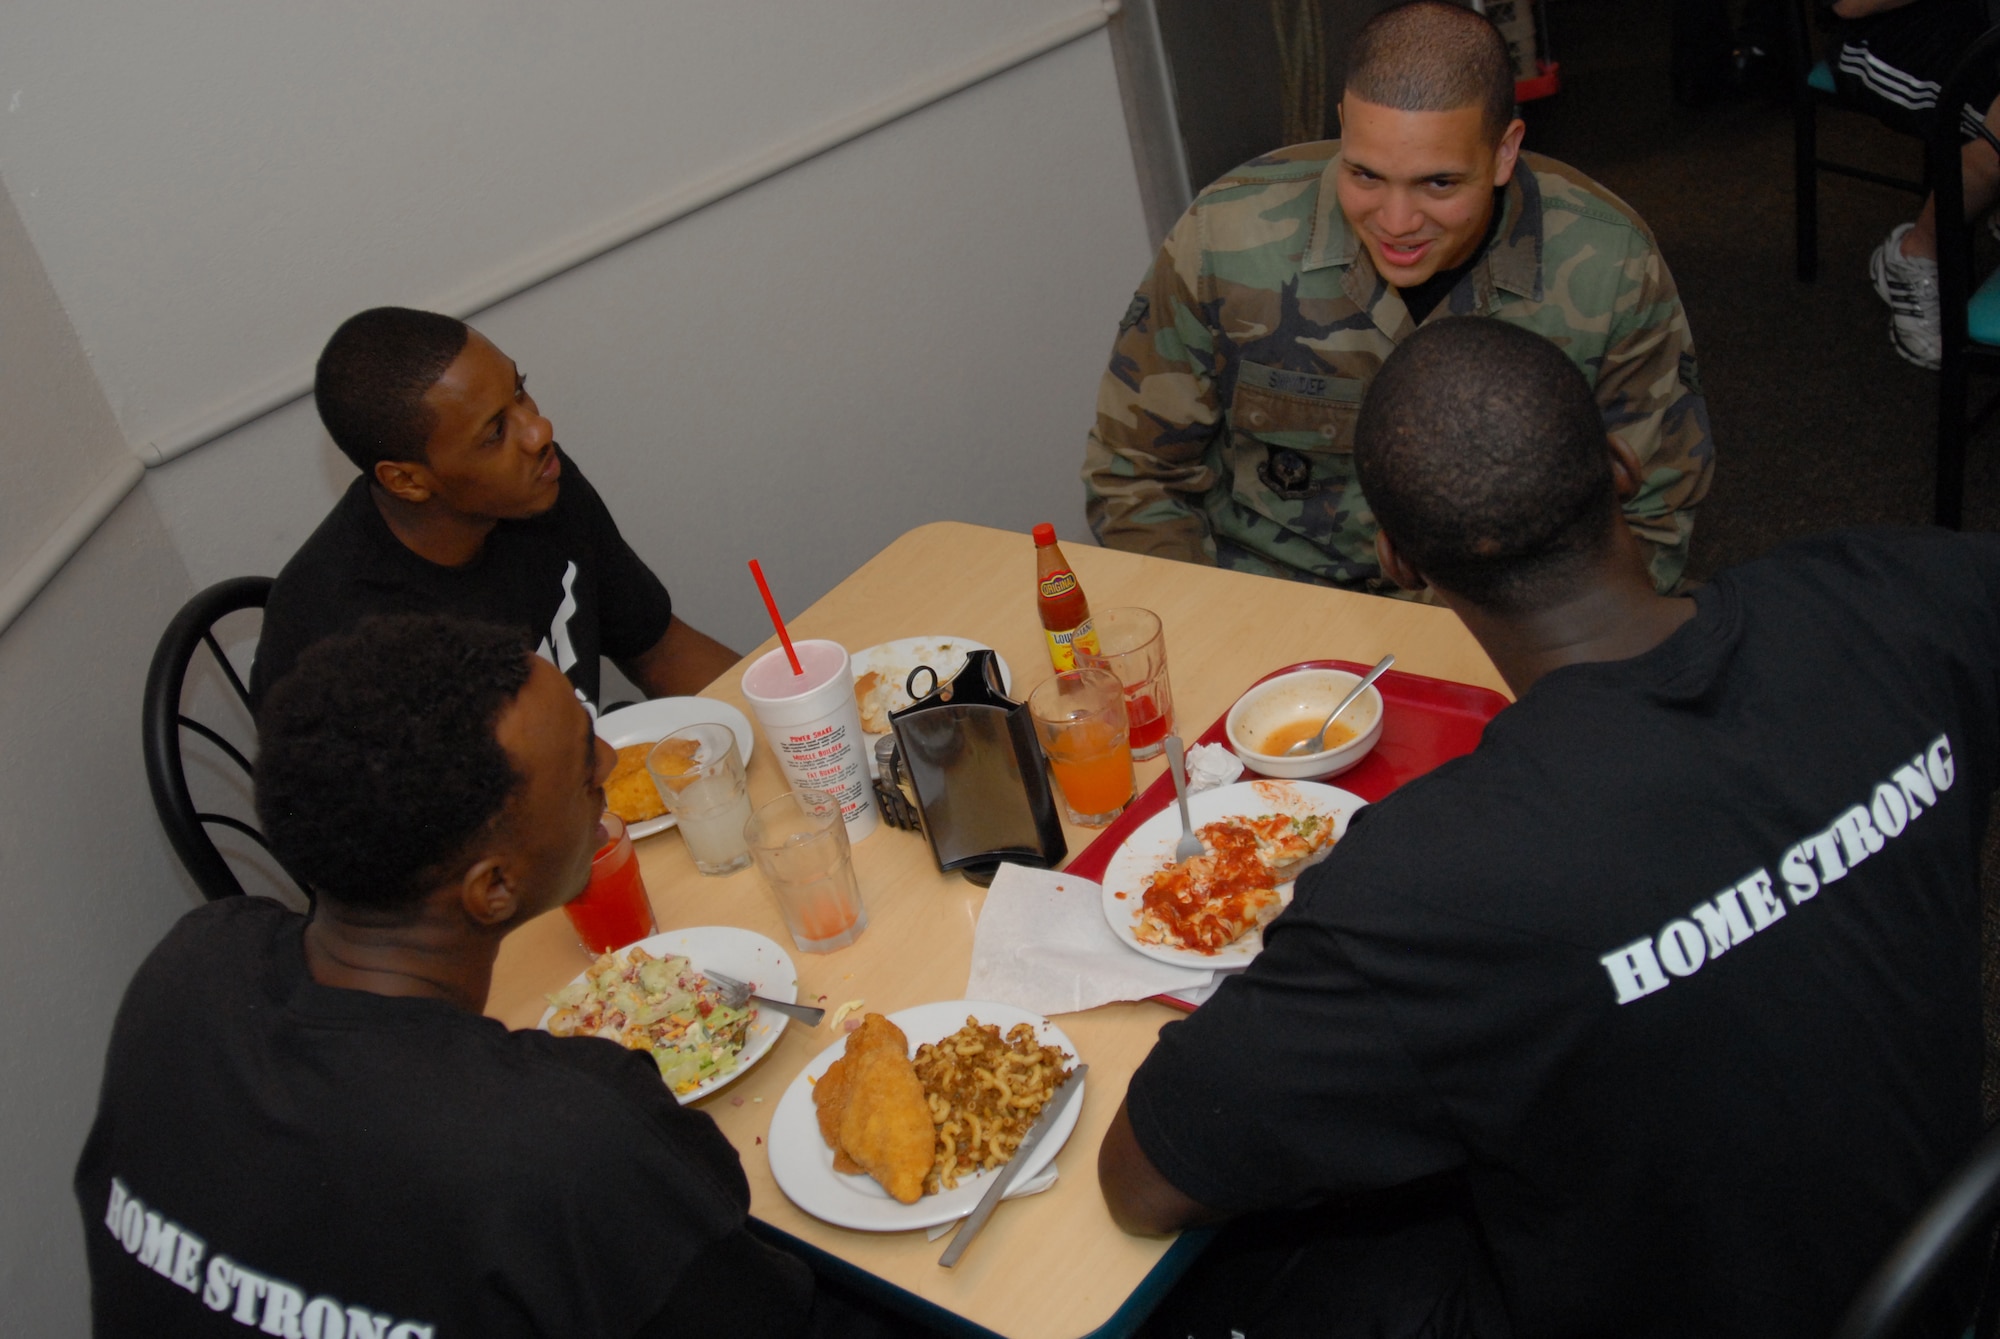 U. S. Air Force Senior Airman George Snyder, 1st Special Operations Aircraft Maintenance Squadron, talks with Miami HEAT players during a surprise lunch visit at the Reef Dining Facility, Hurlburt Field, Fla., Sept. 30, 2010. The HEAT players and staff took time from their 2010 Training Camp to meet with Airmen and learn the missions of Hurlburt Field and Eglin Air Force Base. (DoD photo by U. S. Air Force Staff Sgt. Orly N. Tyrell/Released) 